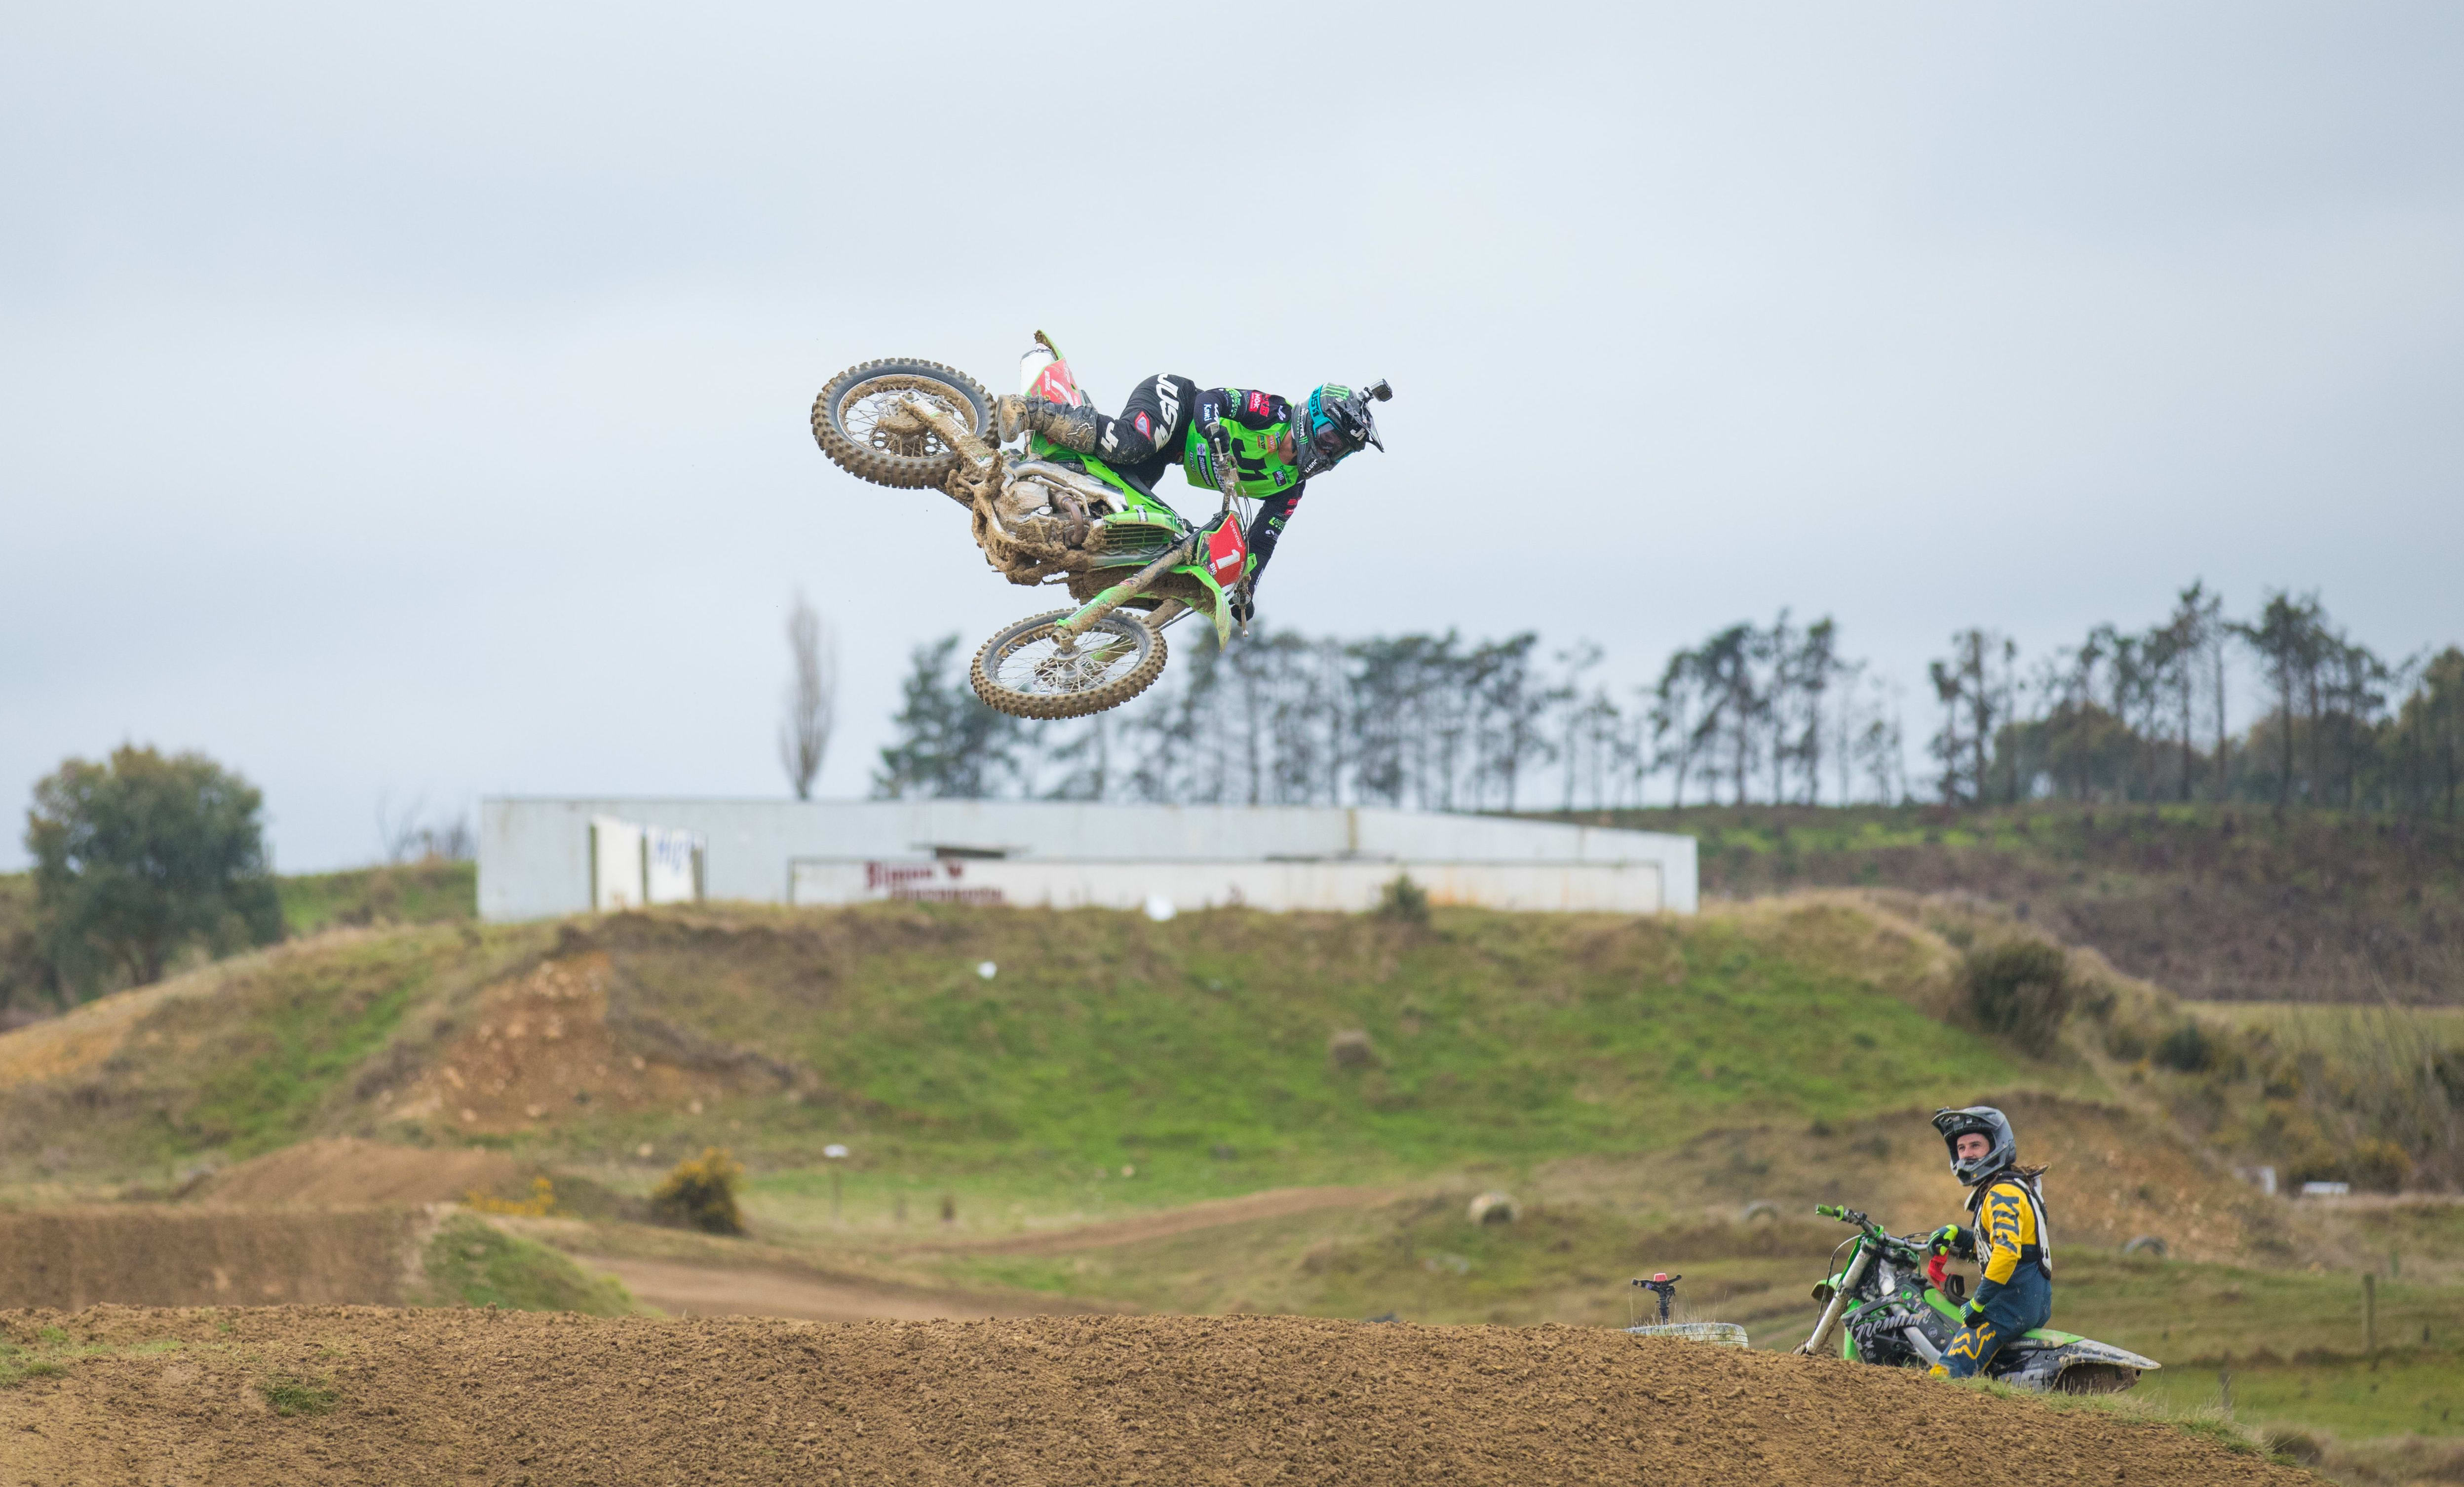 New Zealand motocross rider Courtney Duncan has claimed a second successive world title.